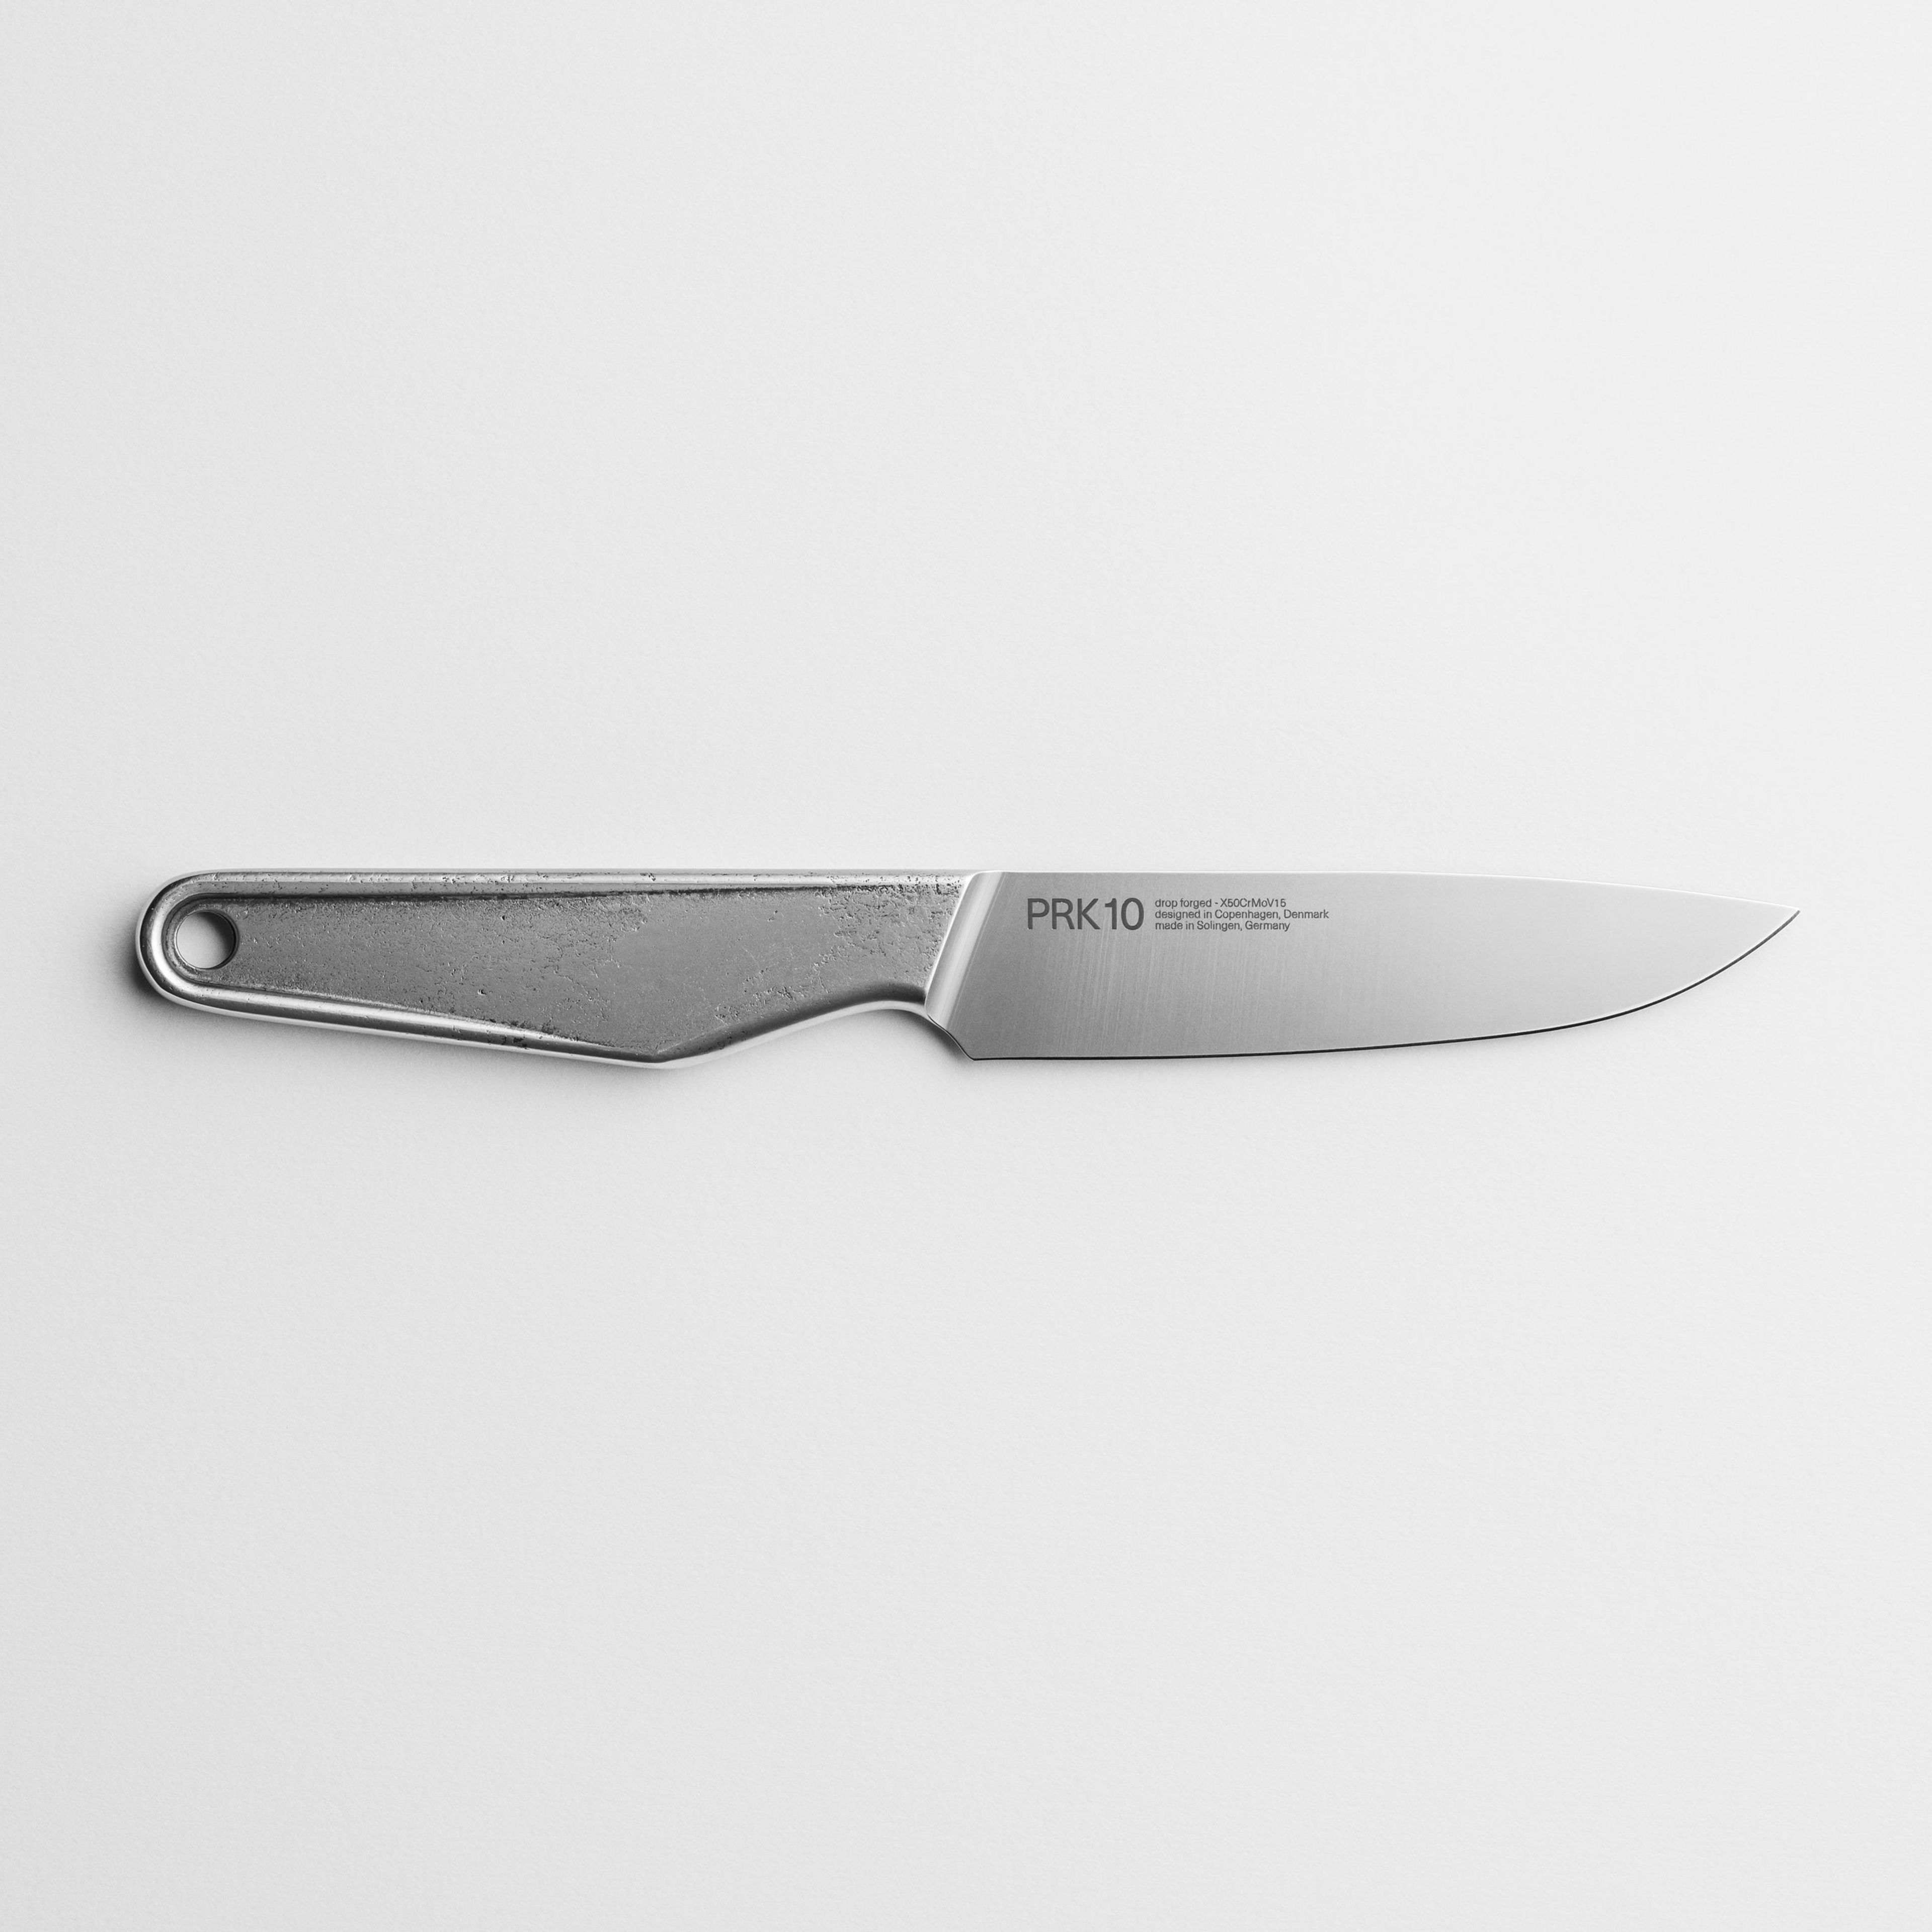 Veark PRK10 Forged Paring knife